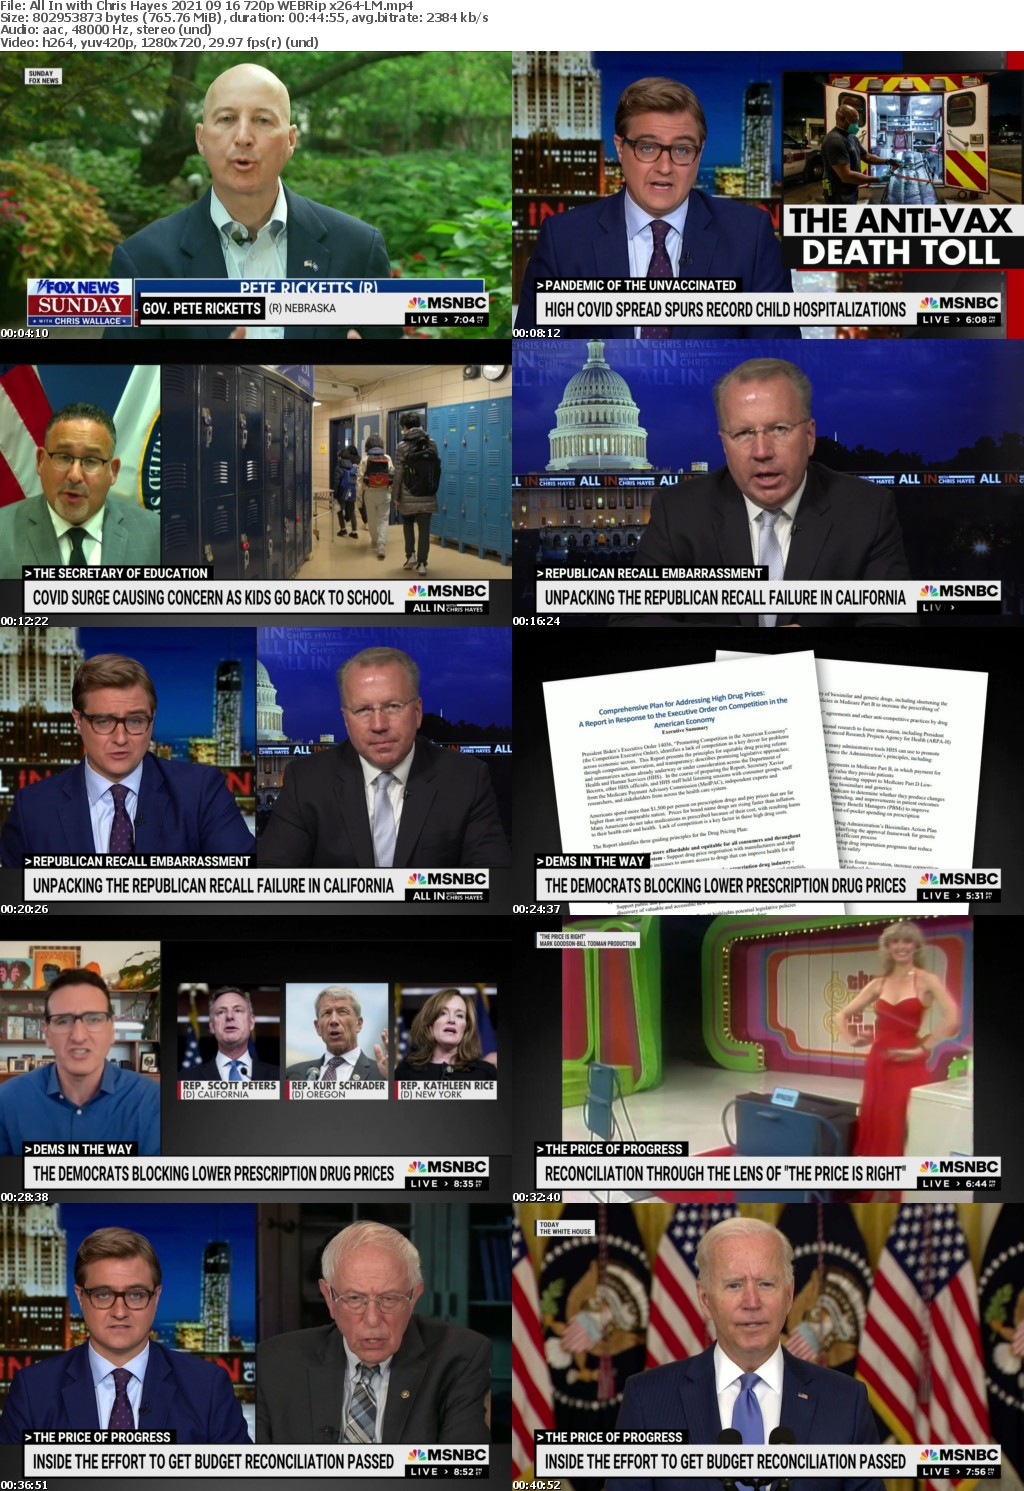 All In with Chris Hayes 2021 09 16 720p WEBRip x264-LM